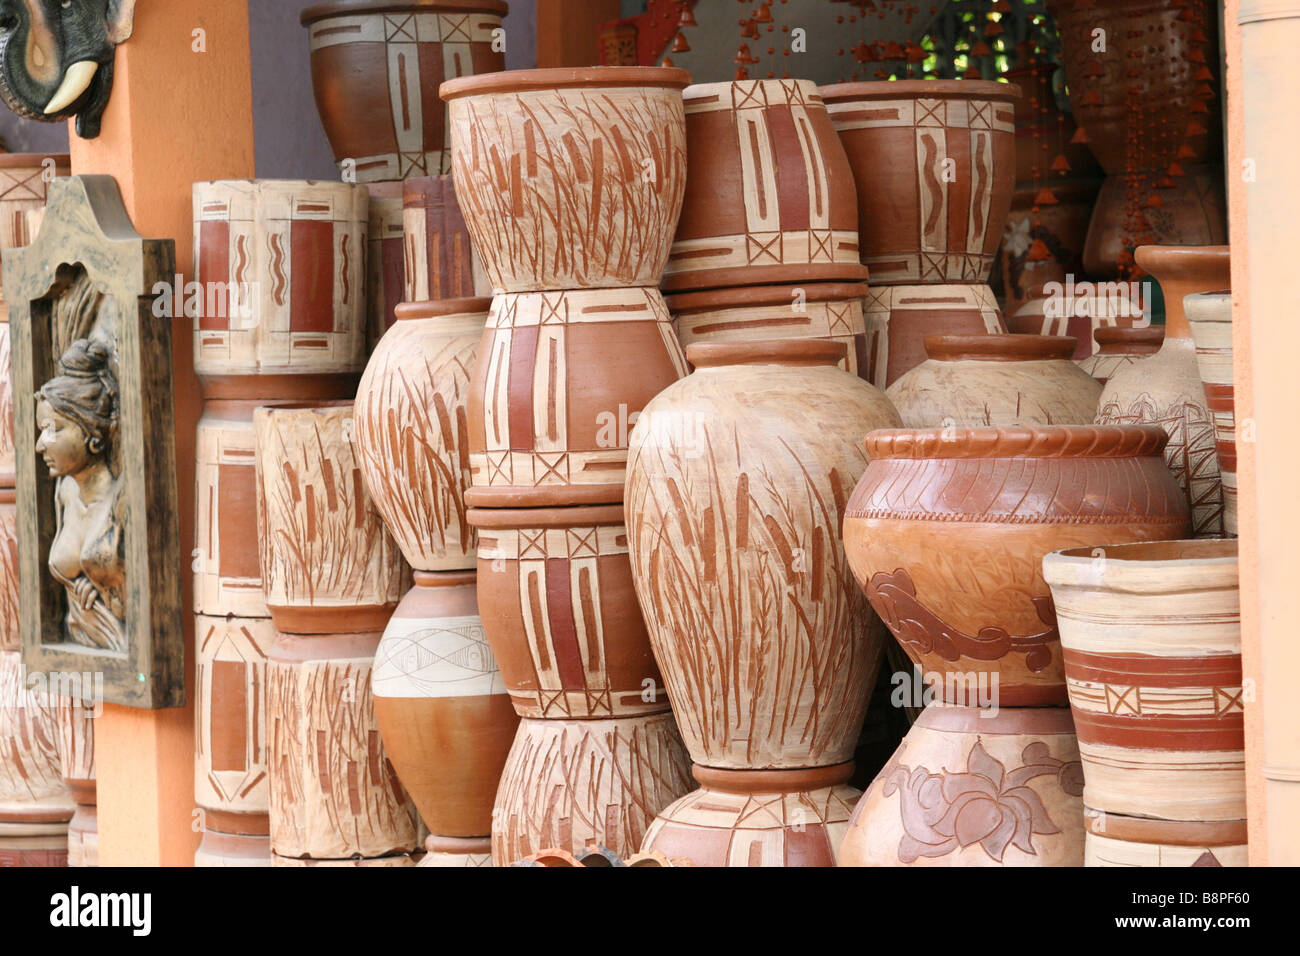 Terracota pots and urns for sale at a roadside stall in Sri Lanka Stock Photo